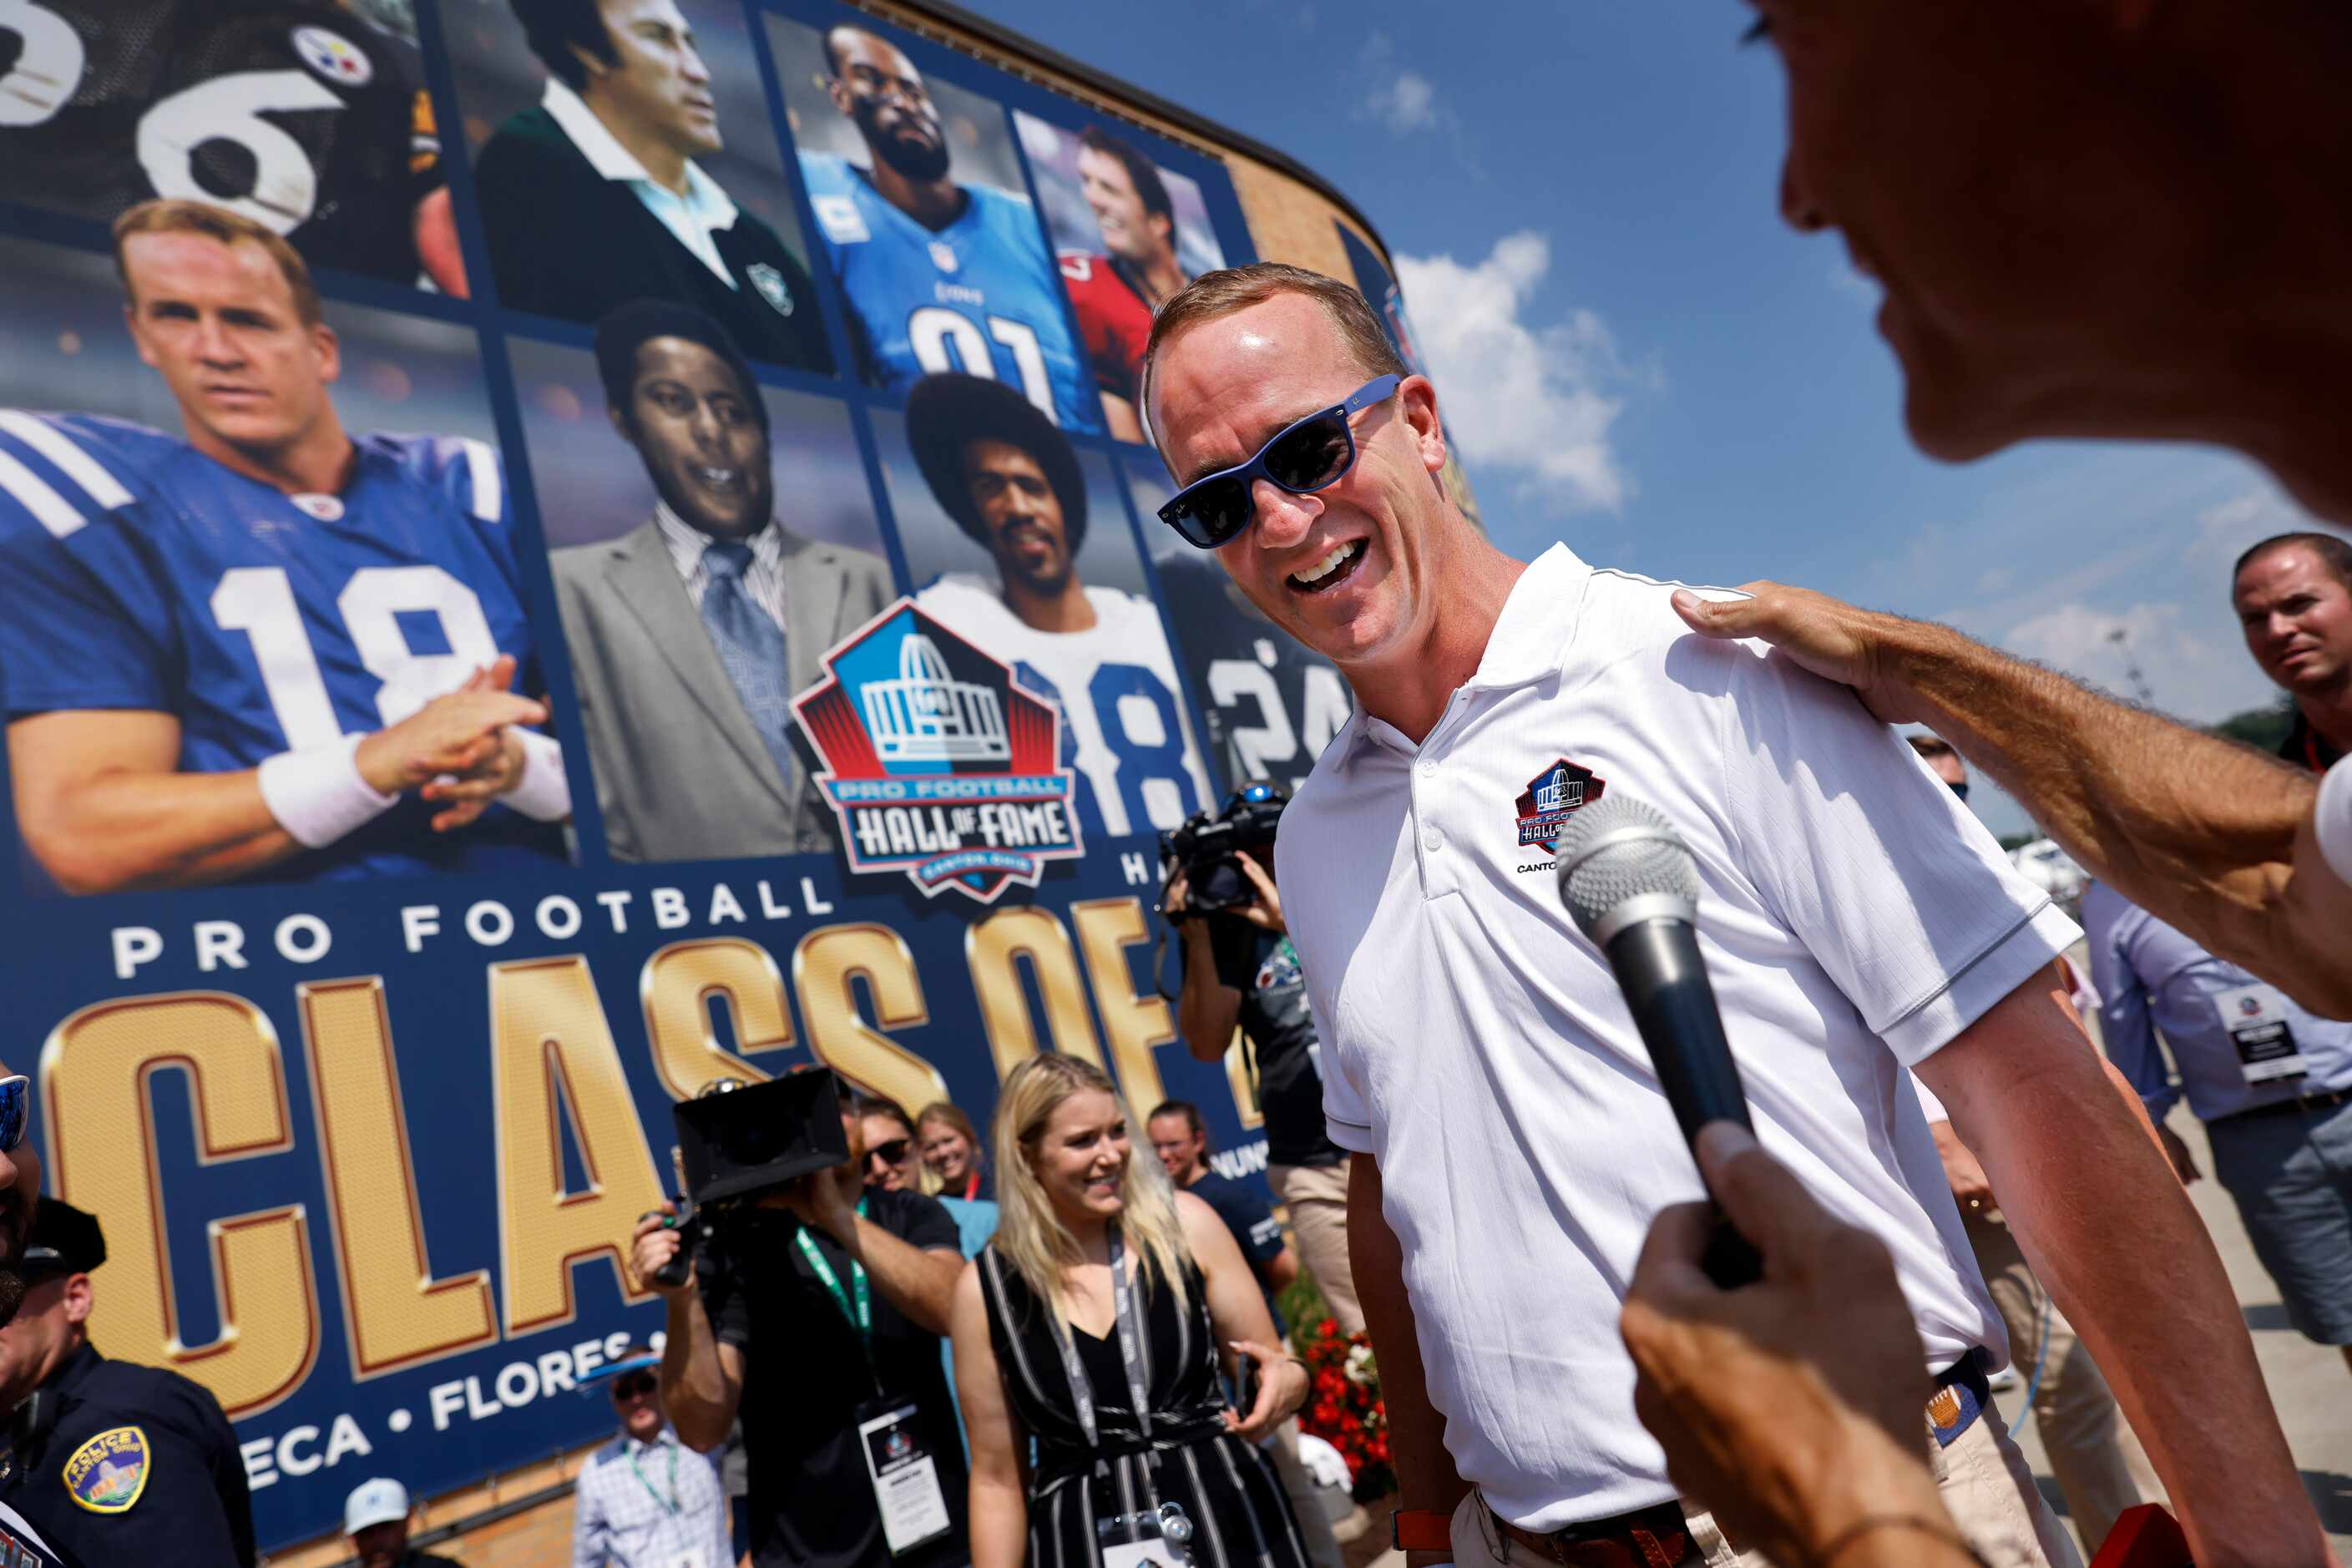 Pro Football Hall of Fame inductee Peyton Manning of the Indianapolis Colts visits with the...